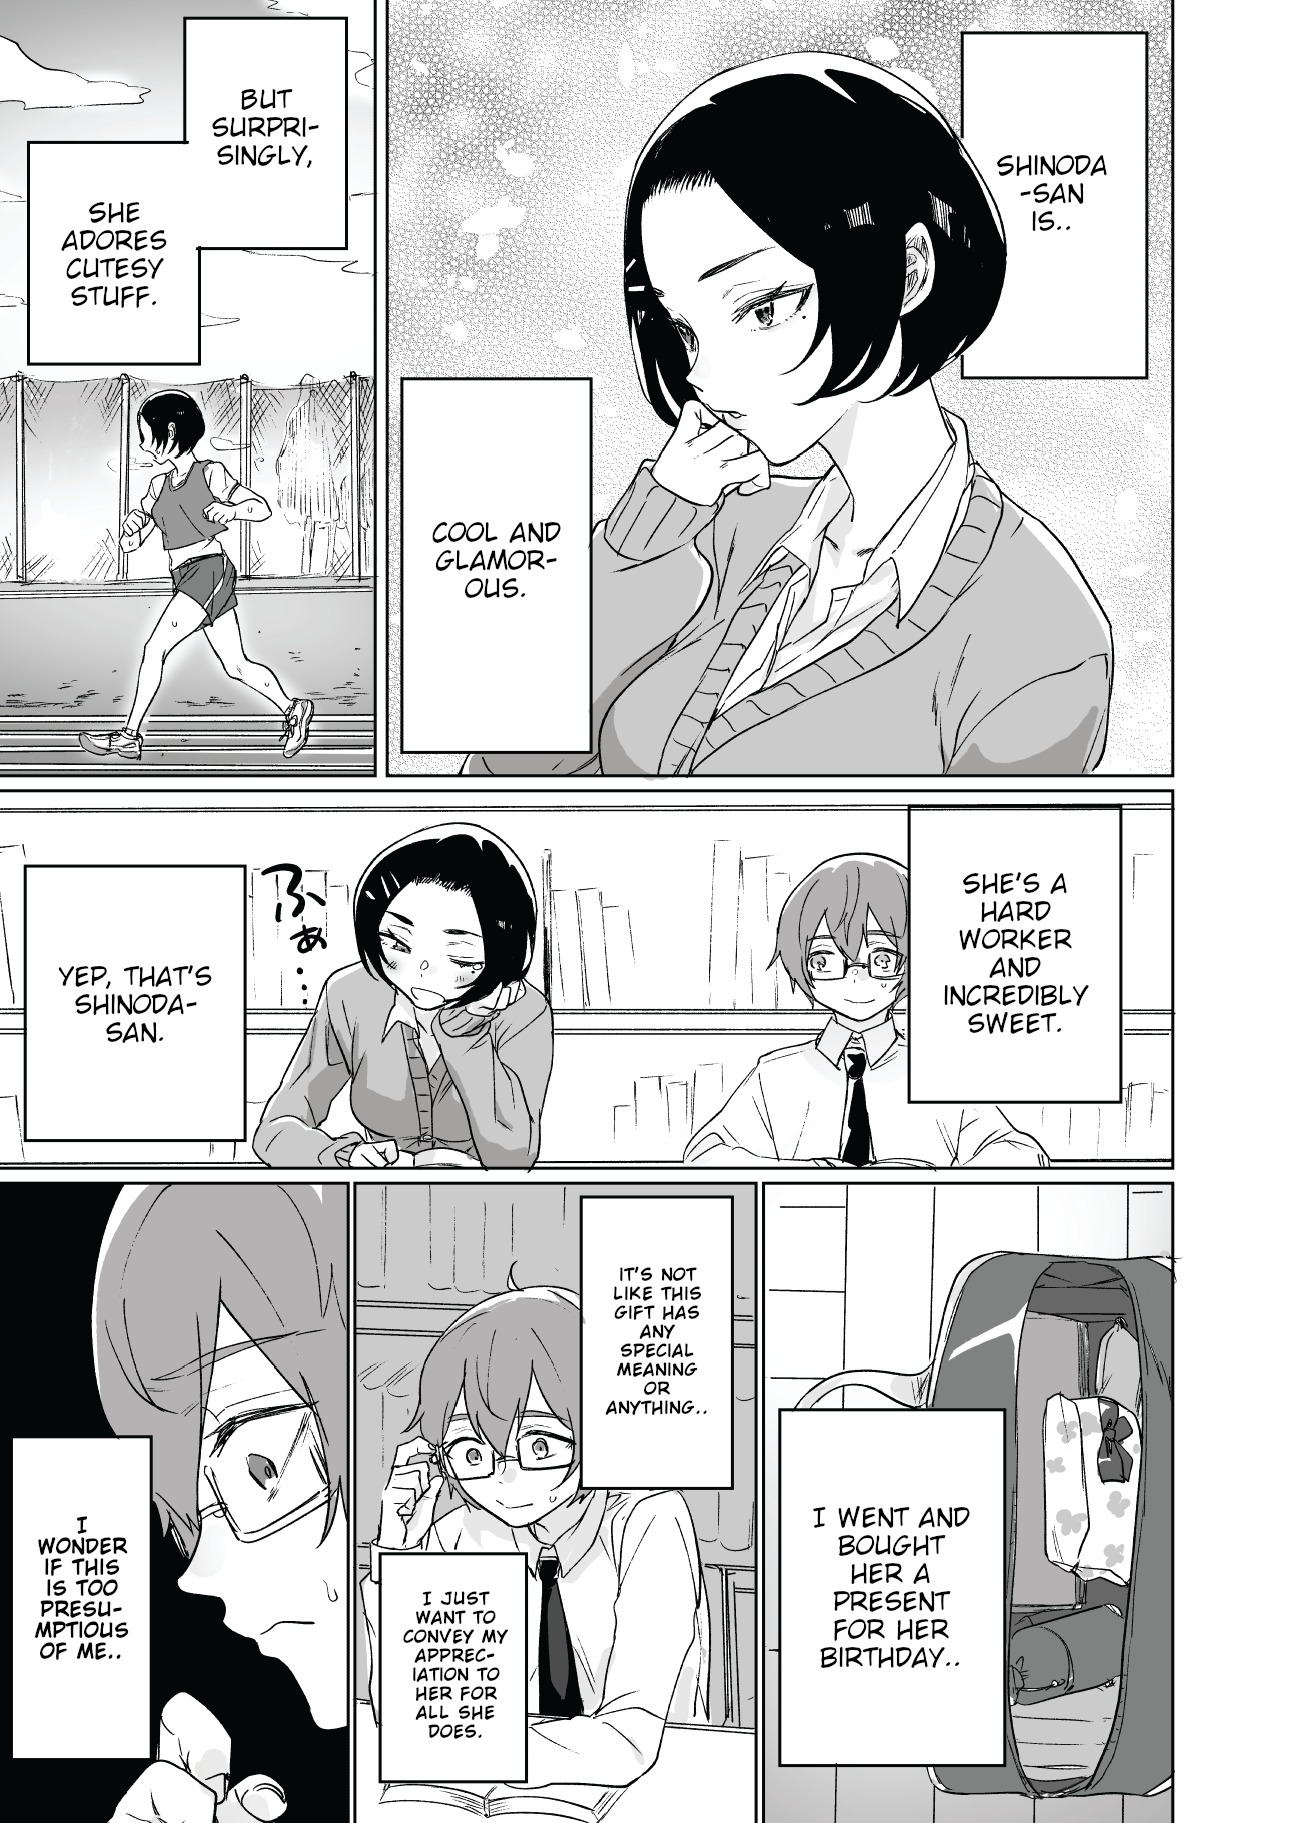 At first glance, Shinoda-san seems cool but is actually adorable! vol.1 ch.5